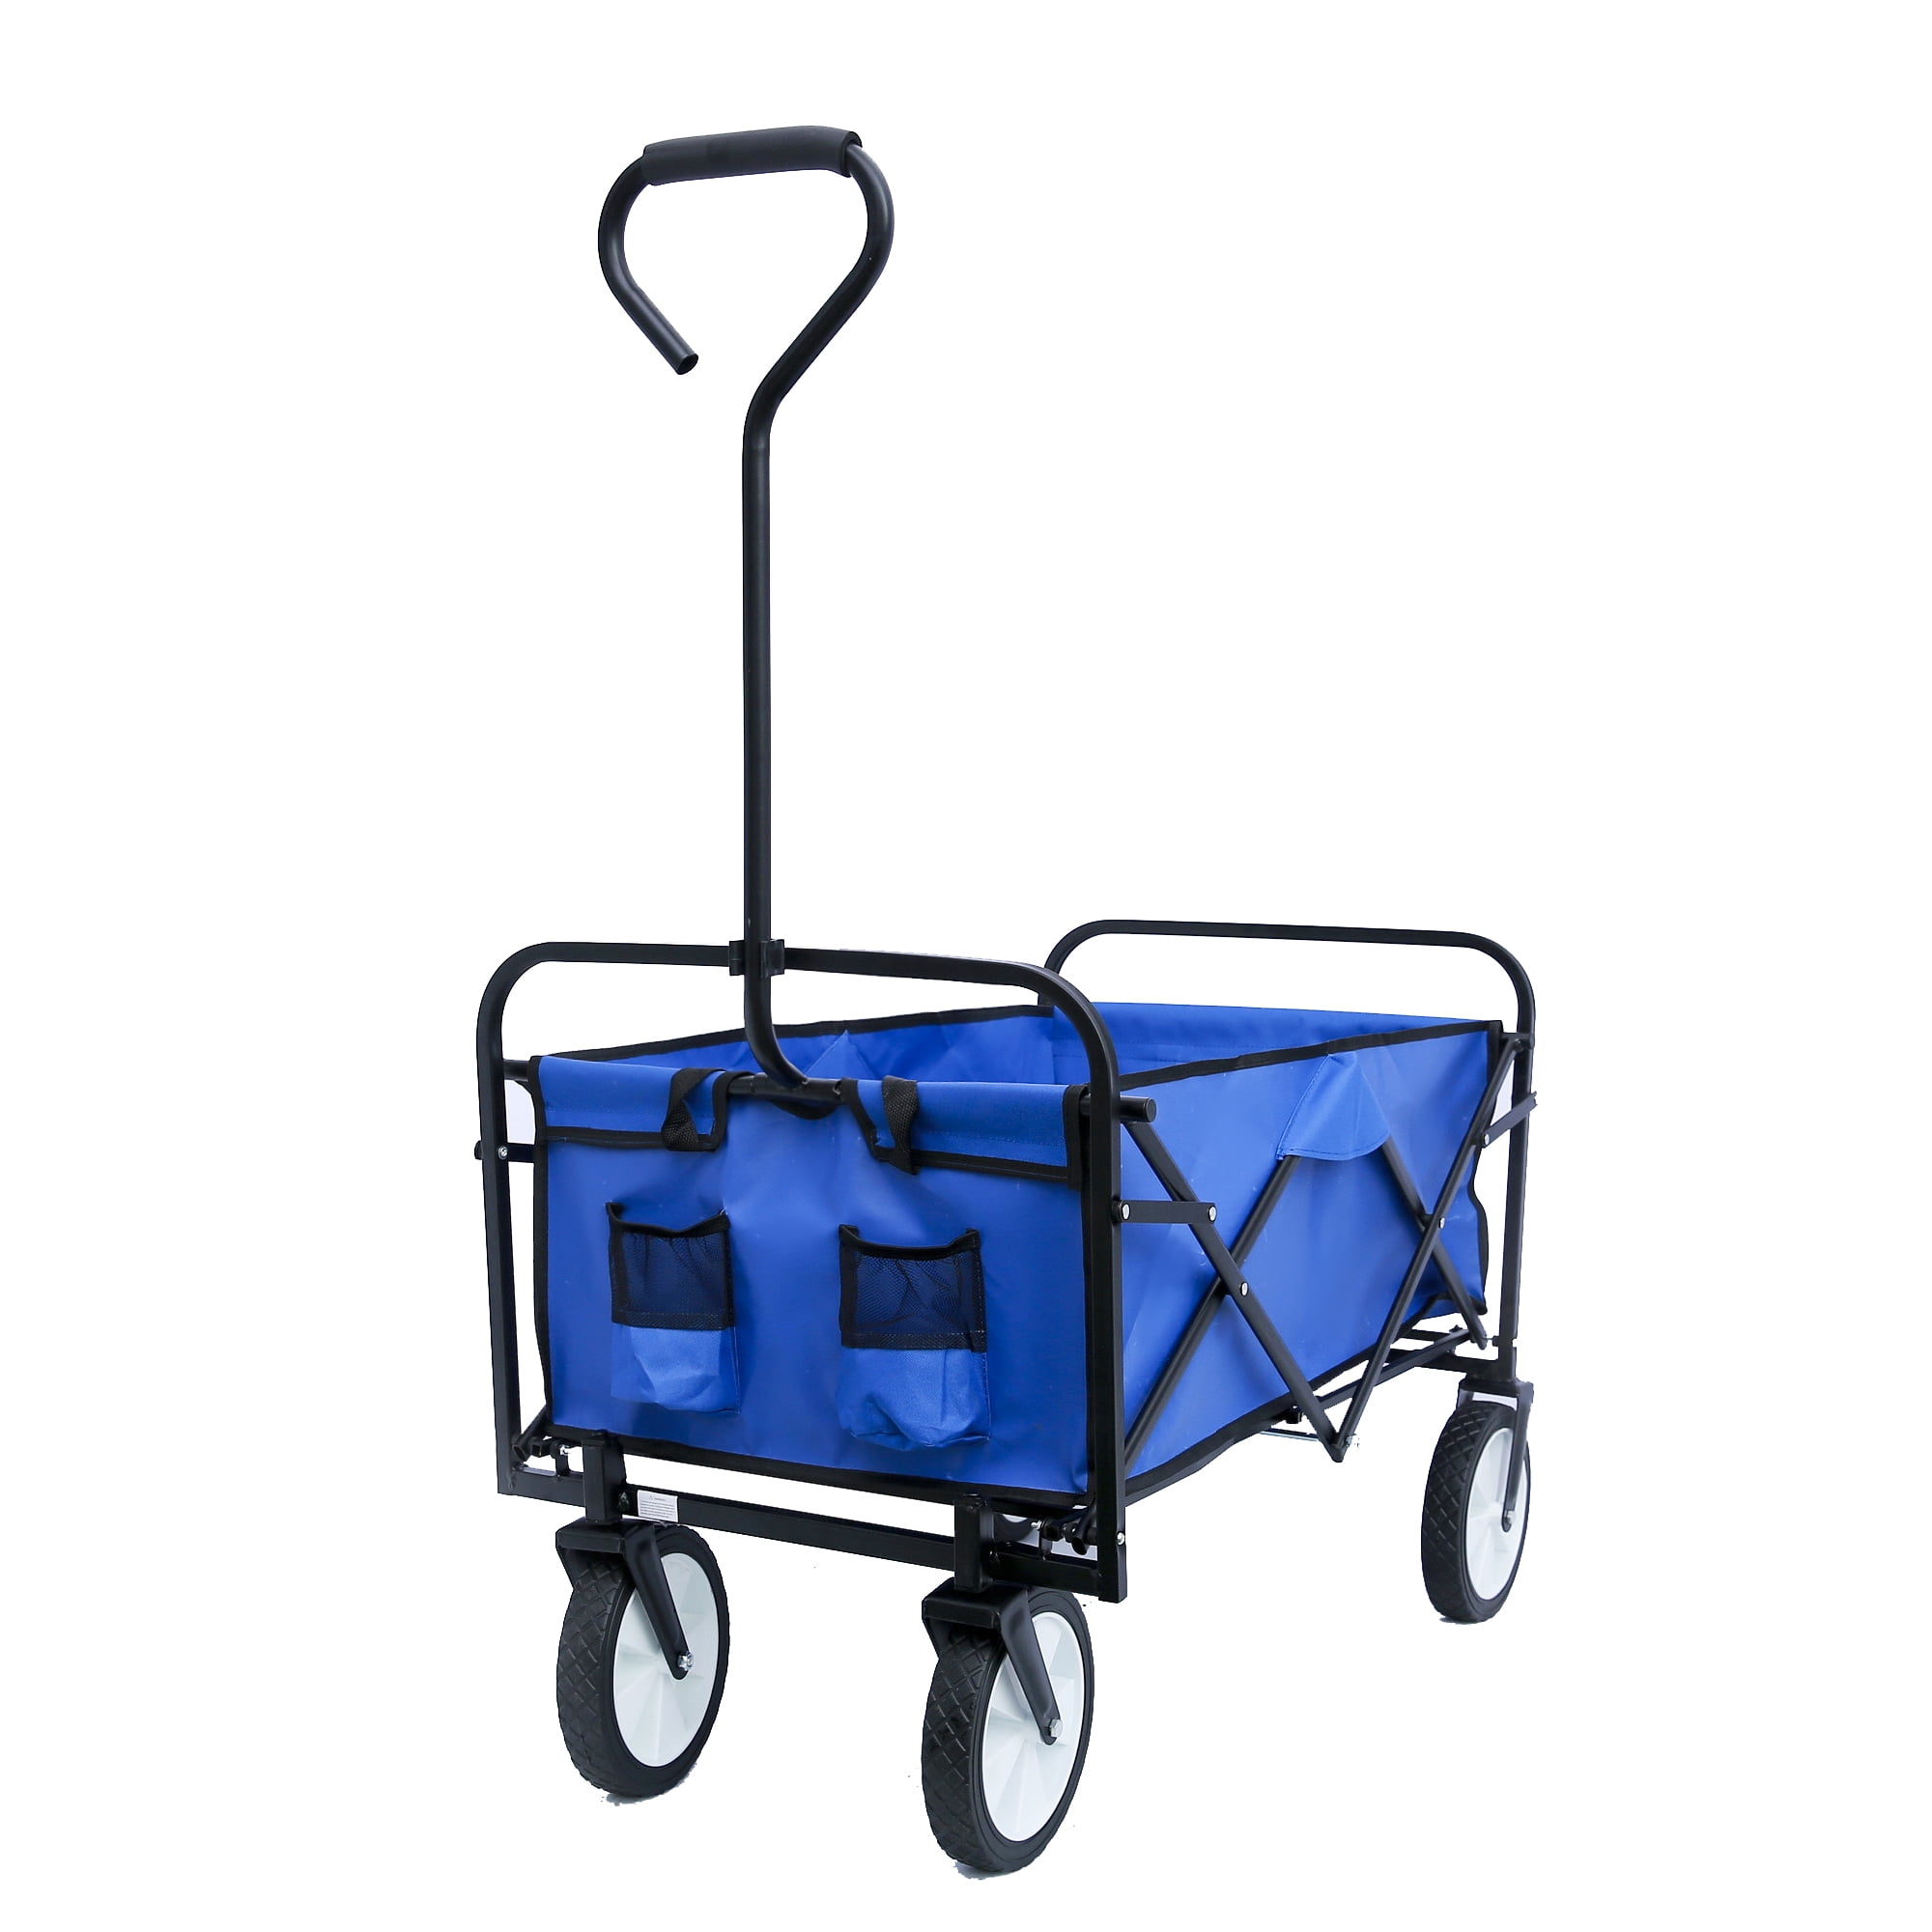 Folding Collapsible Outdoor Utility Wagon Cart Heavy Duty Grocery Garden Cart US 